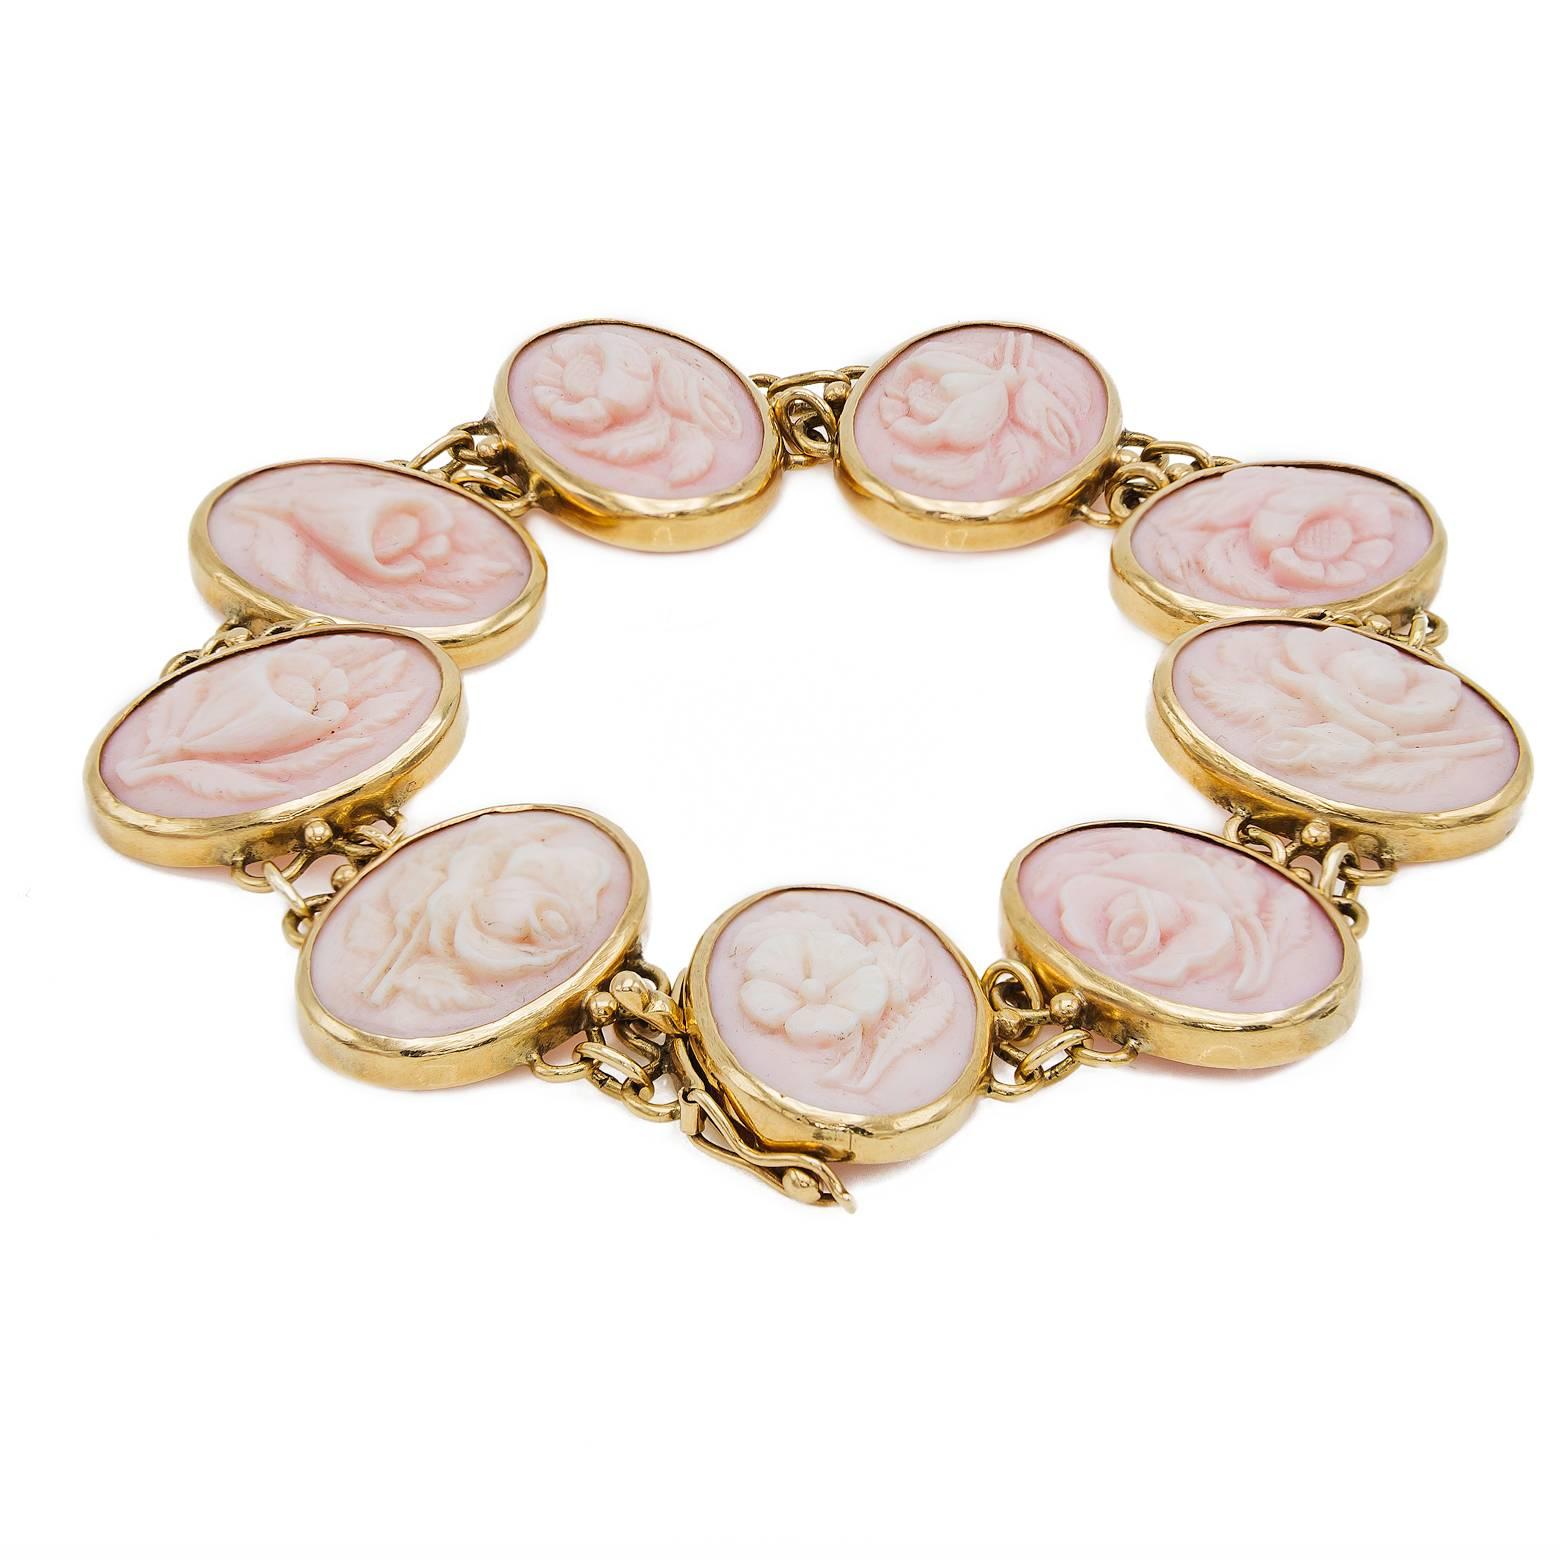 Art Deco Conch Shell Cameo Bracelet with Engraved Flowers in 14K Yellow Gold